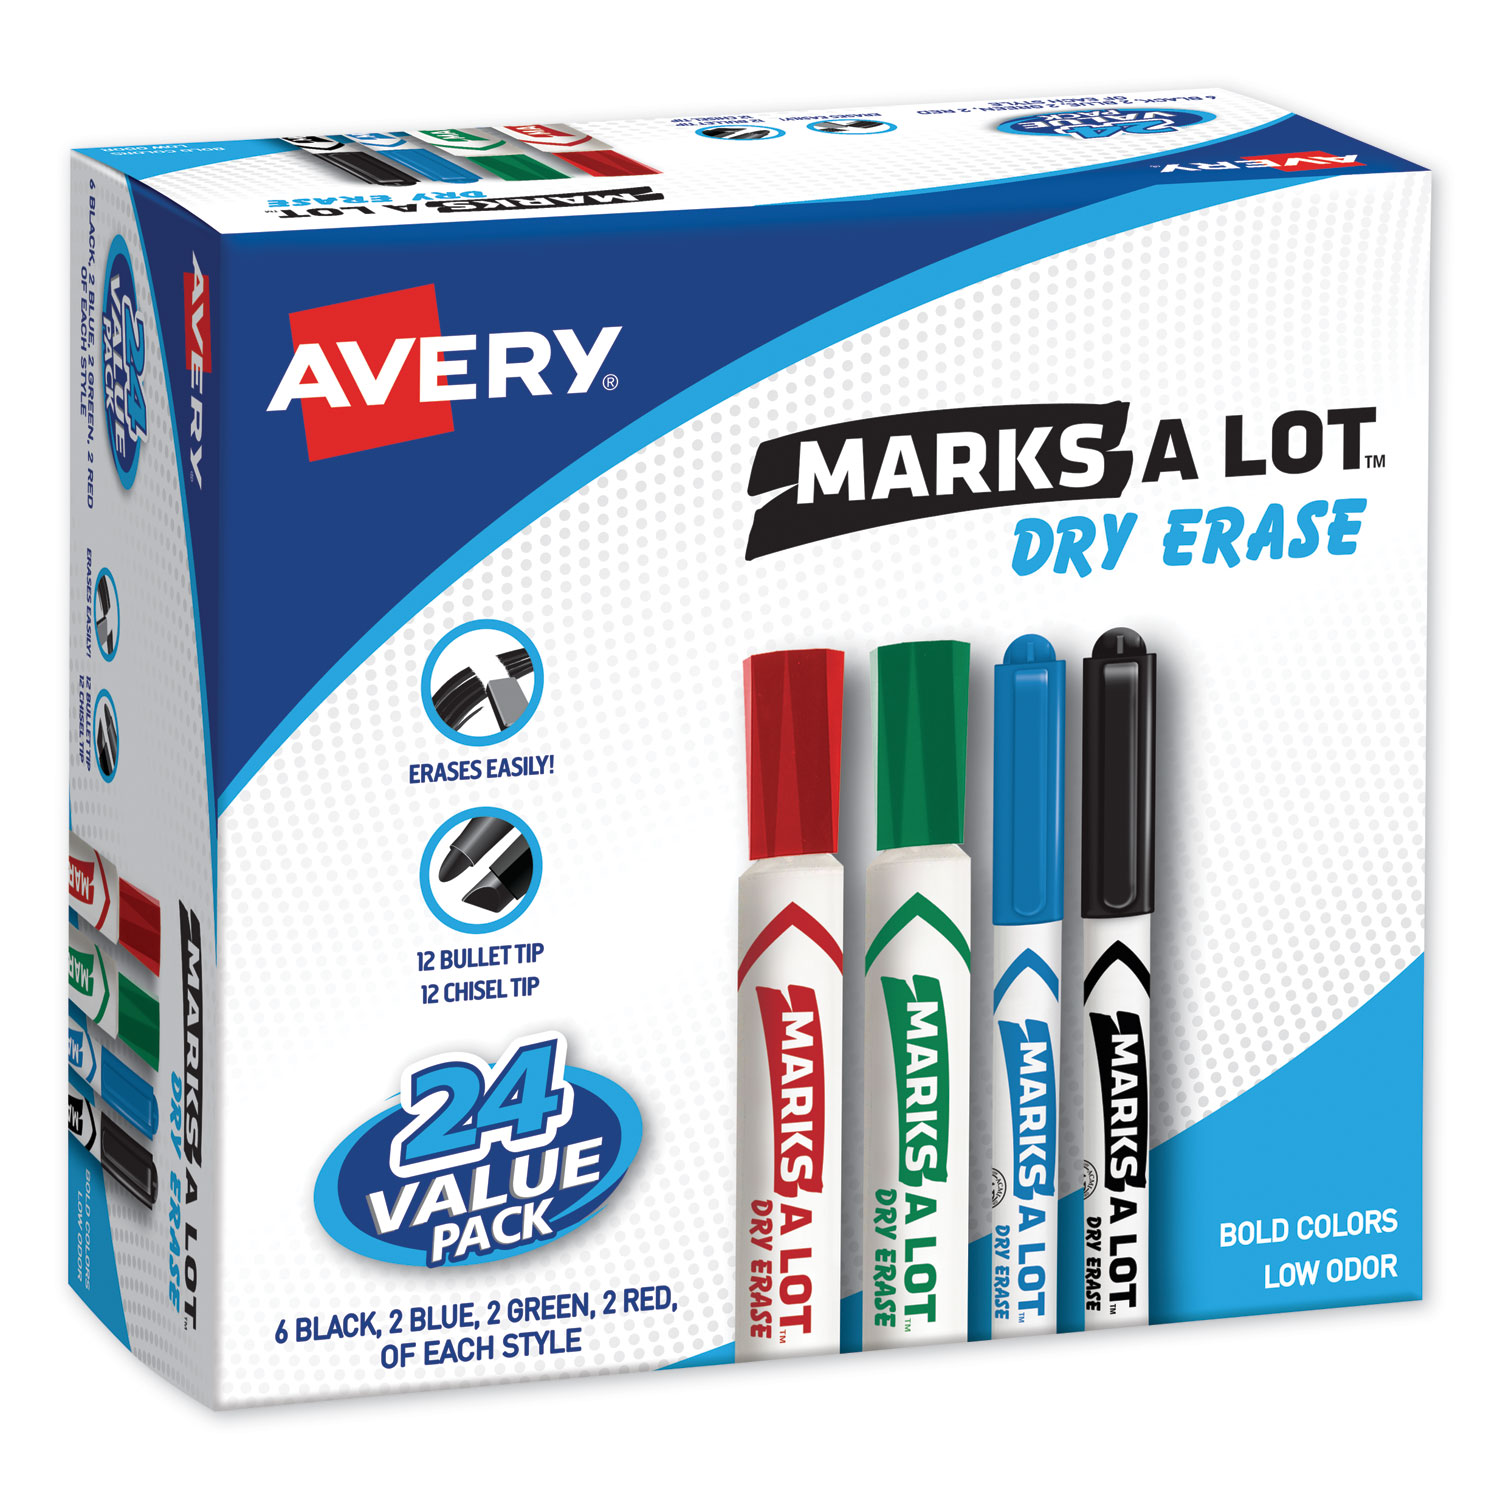  Avery 29870 MARKS A LOT Desk/Pen Style Dry Erase Marker Combo Pack, 12 Broad Bullet Tip, 12 Broad Chisel Tip, Assorted Colors, 24/Pack (AVE29870) 